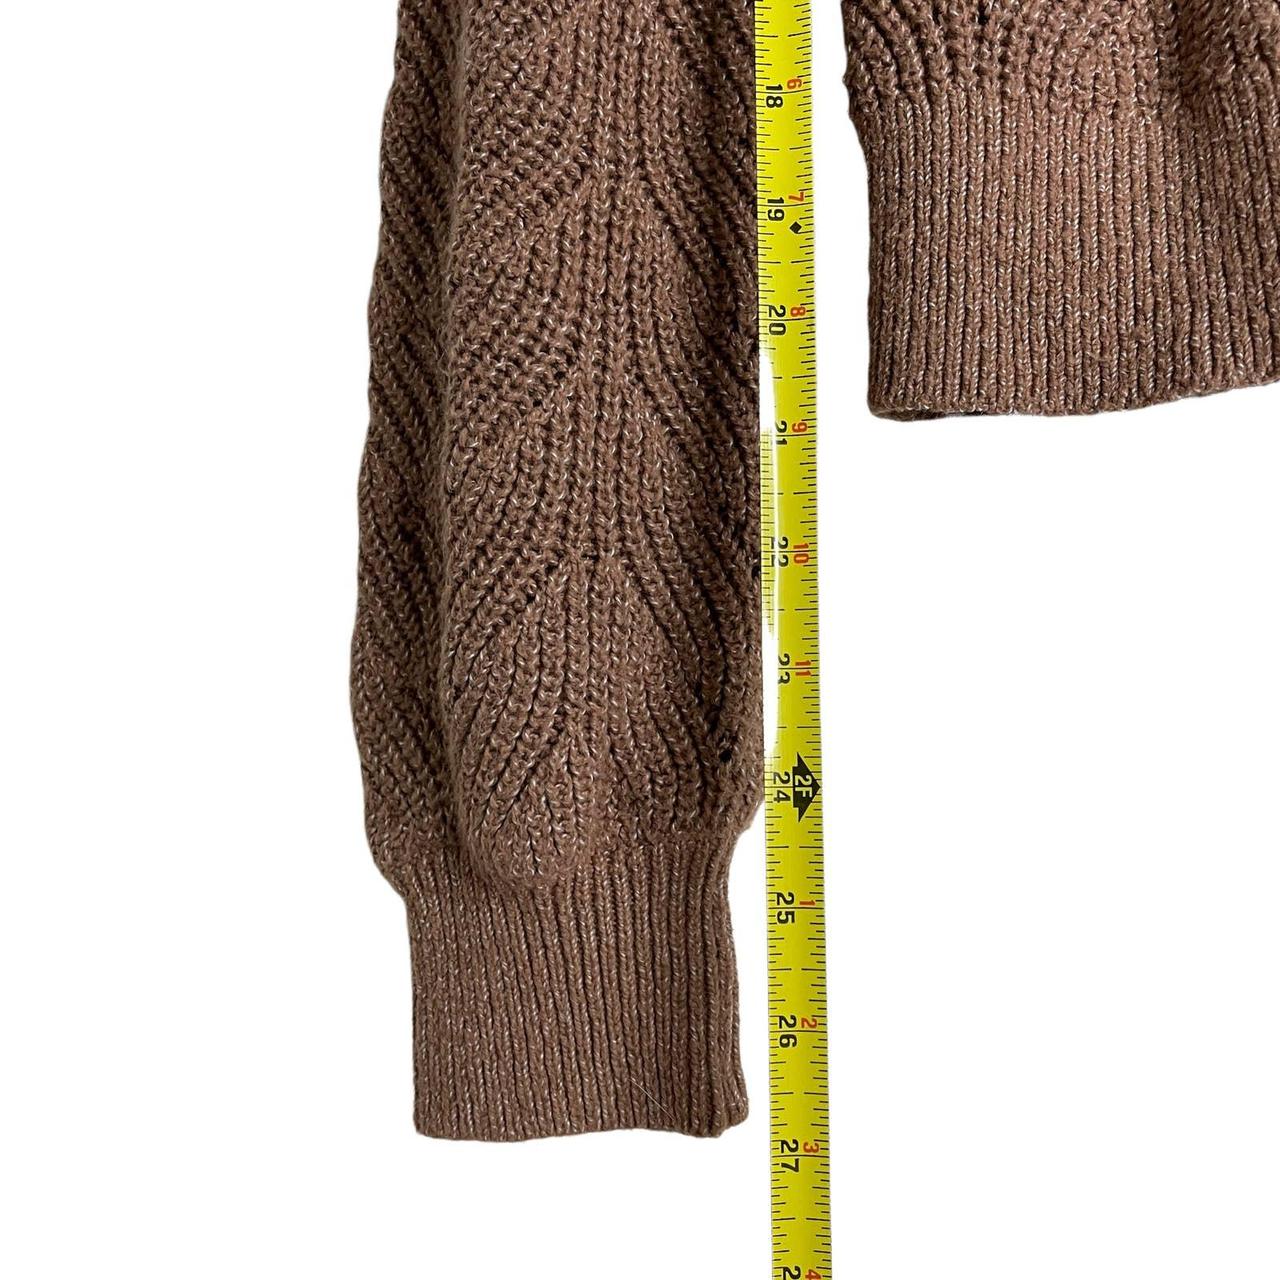 Abercrombie & Fitch Women's Brown Jumper (4)